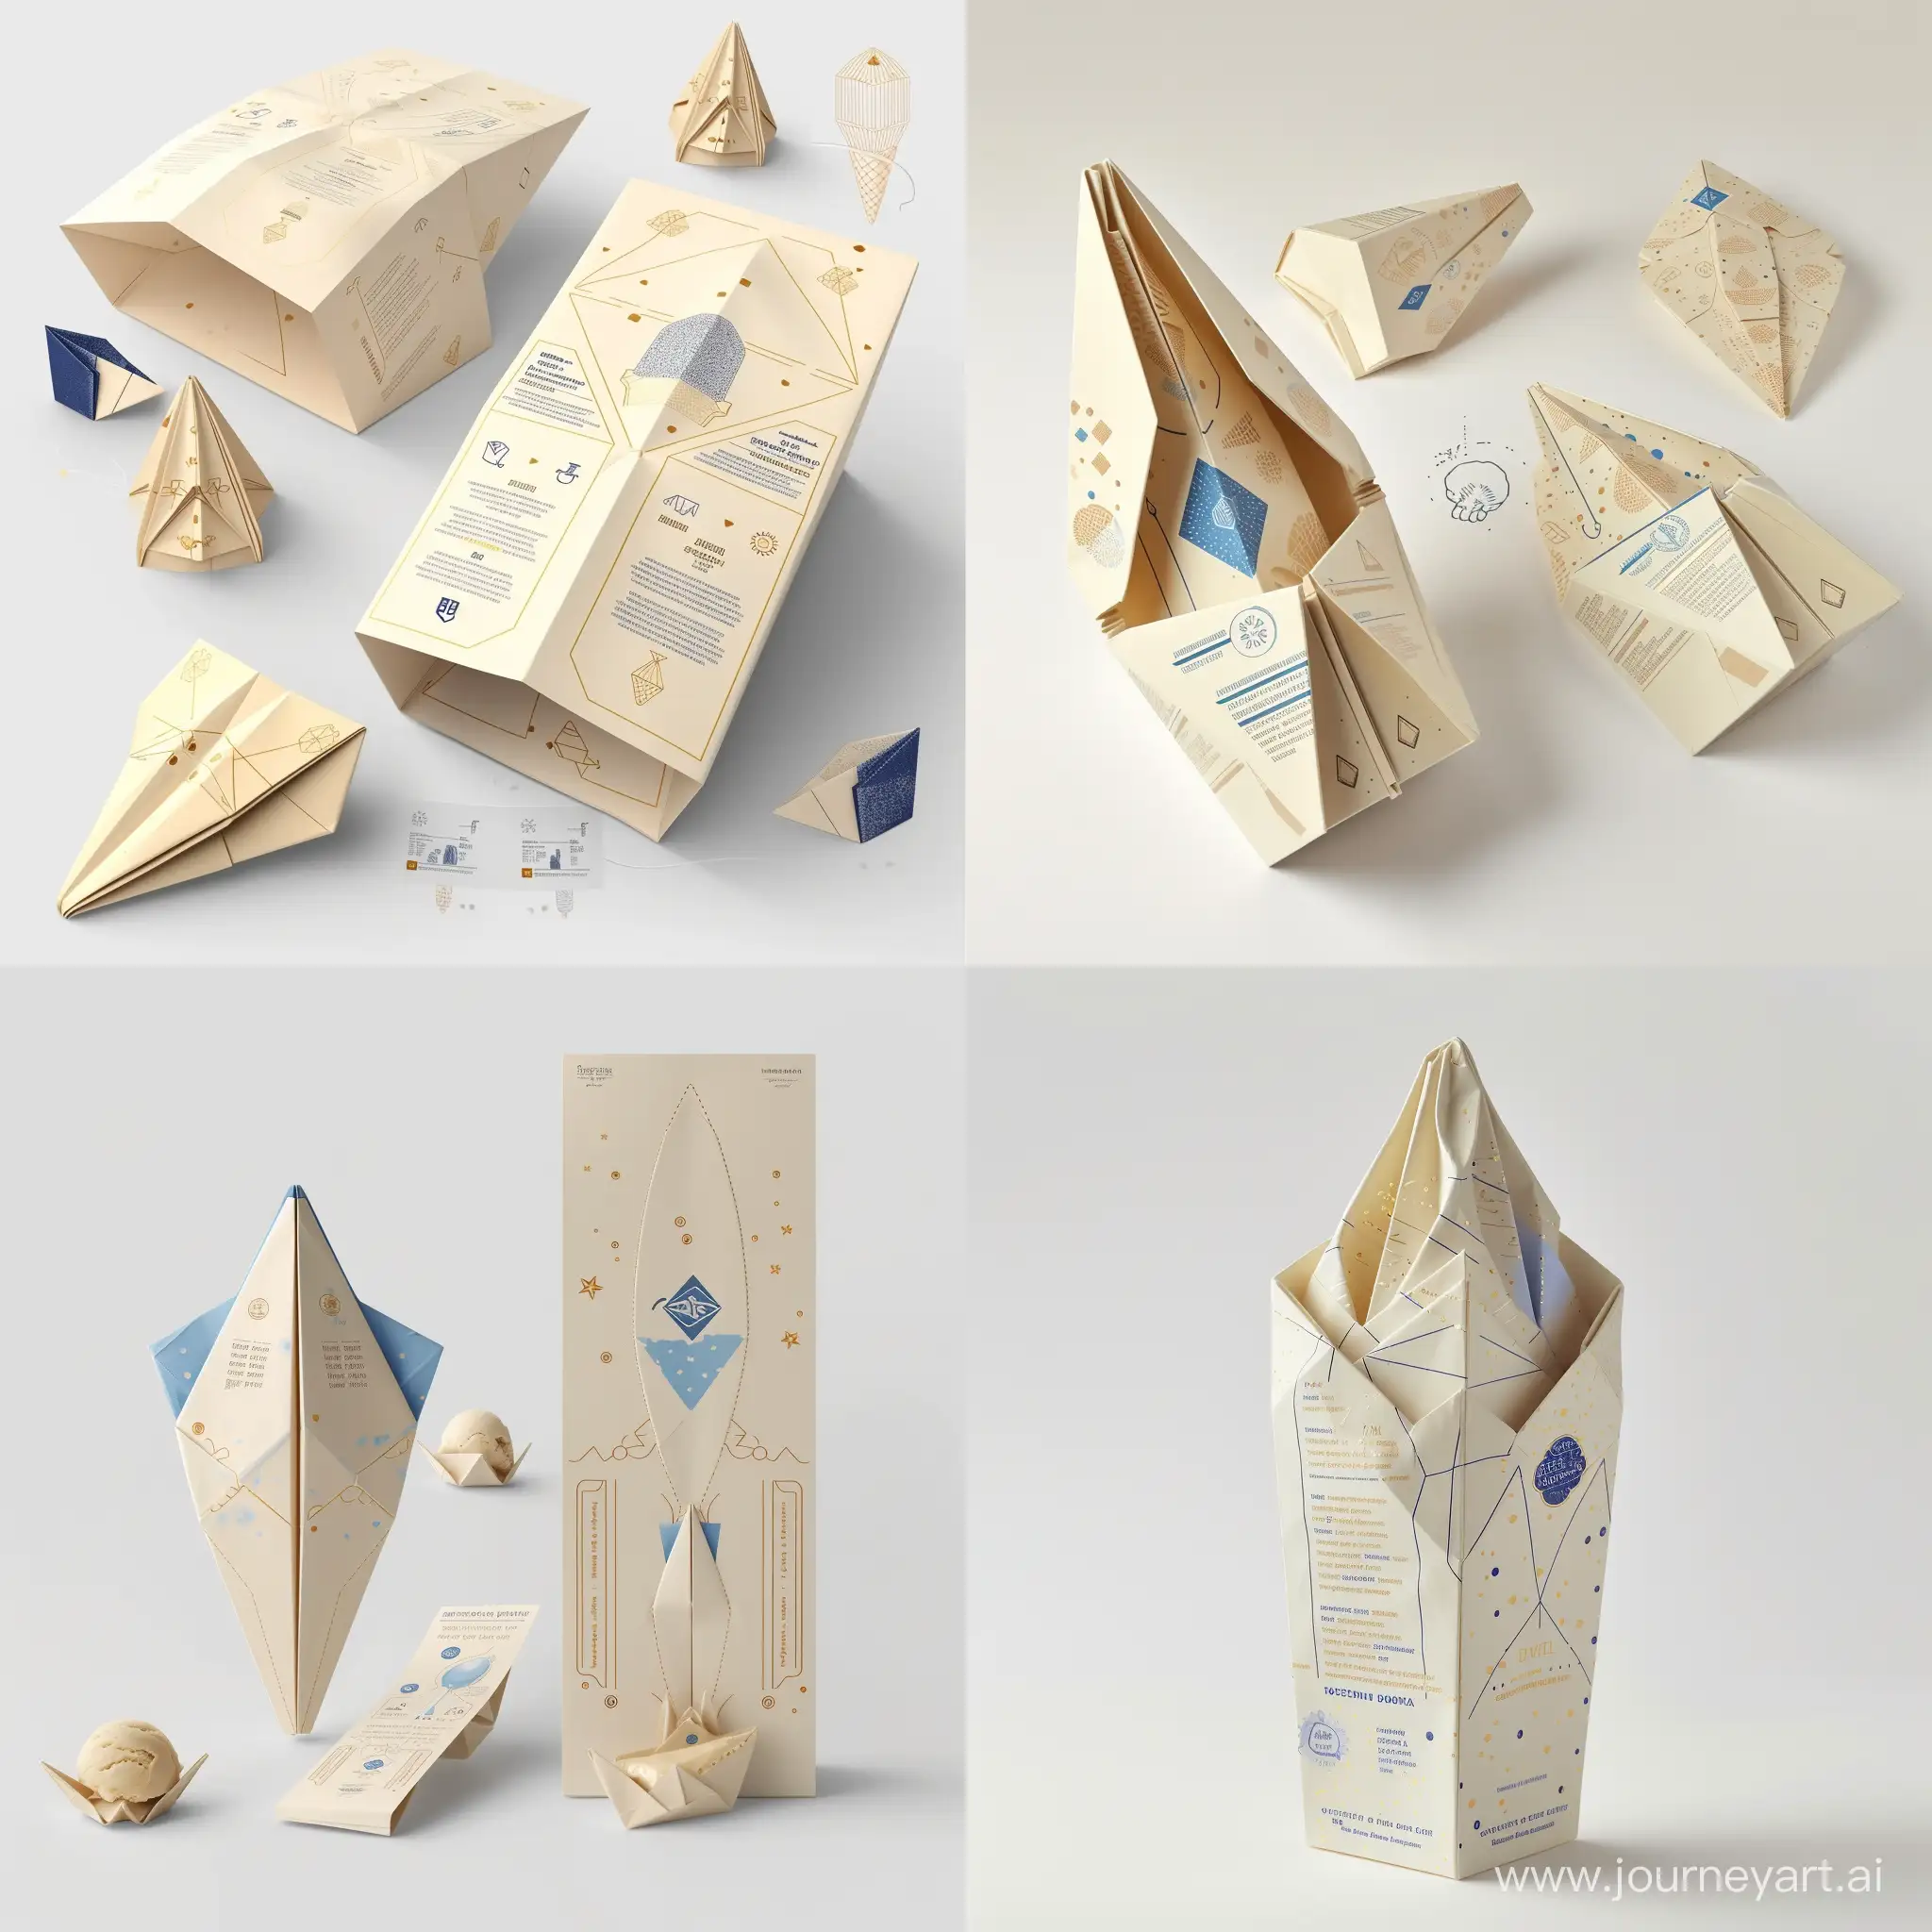 Creative-OrigamiStyle-Ice-Cream-Packaging-with-Foldable-Design-and-Instruction-Booklet